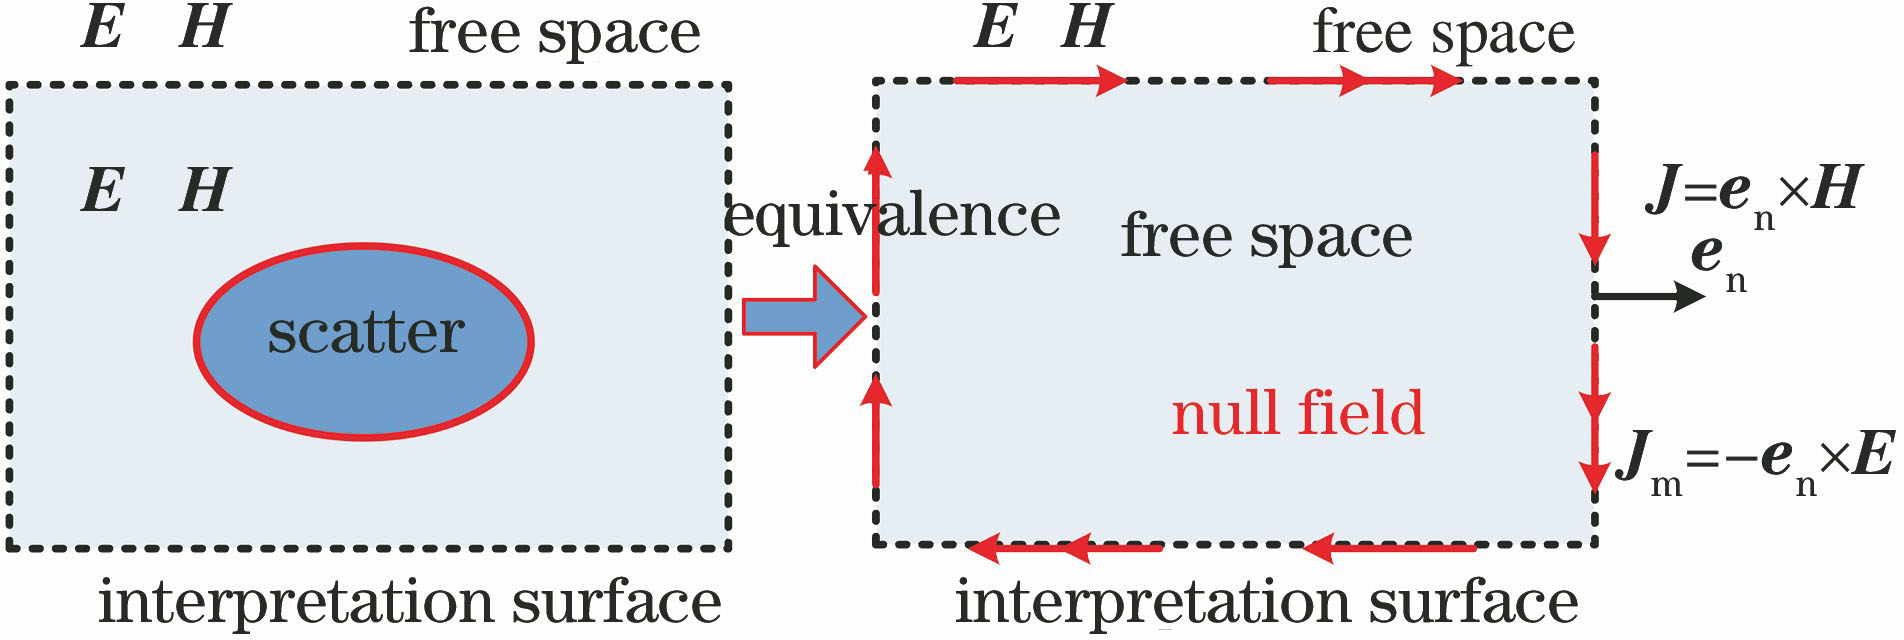 Schematic of the equivalence principle of electromagnetic field